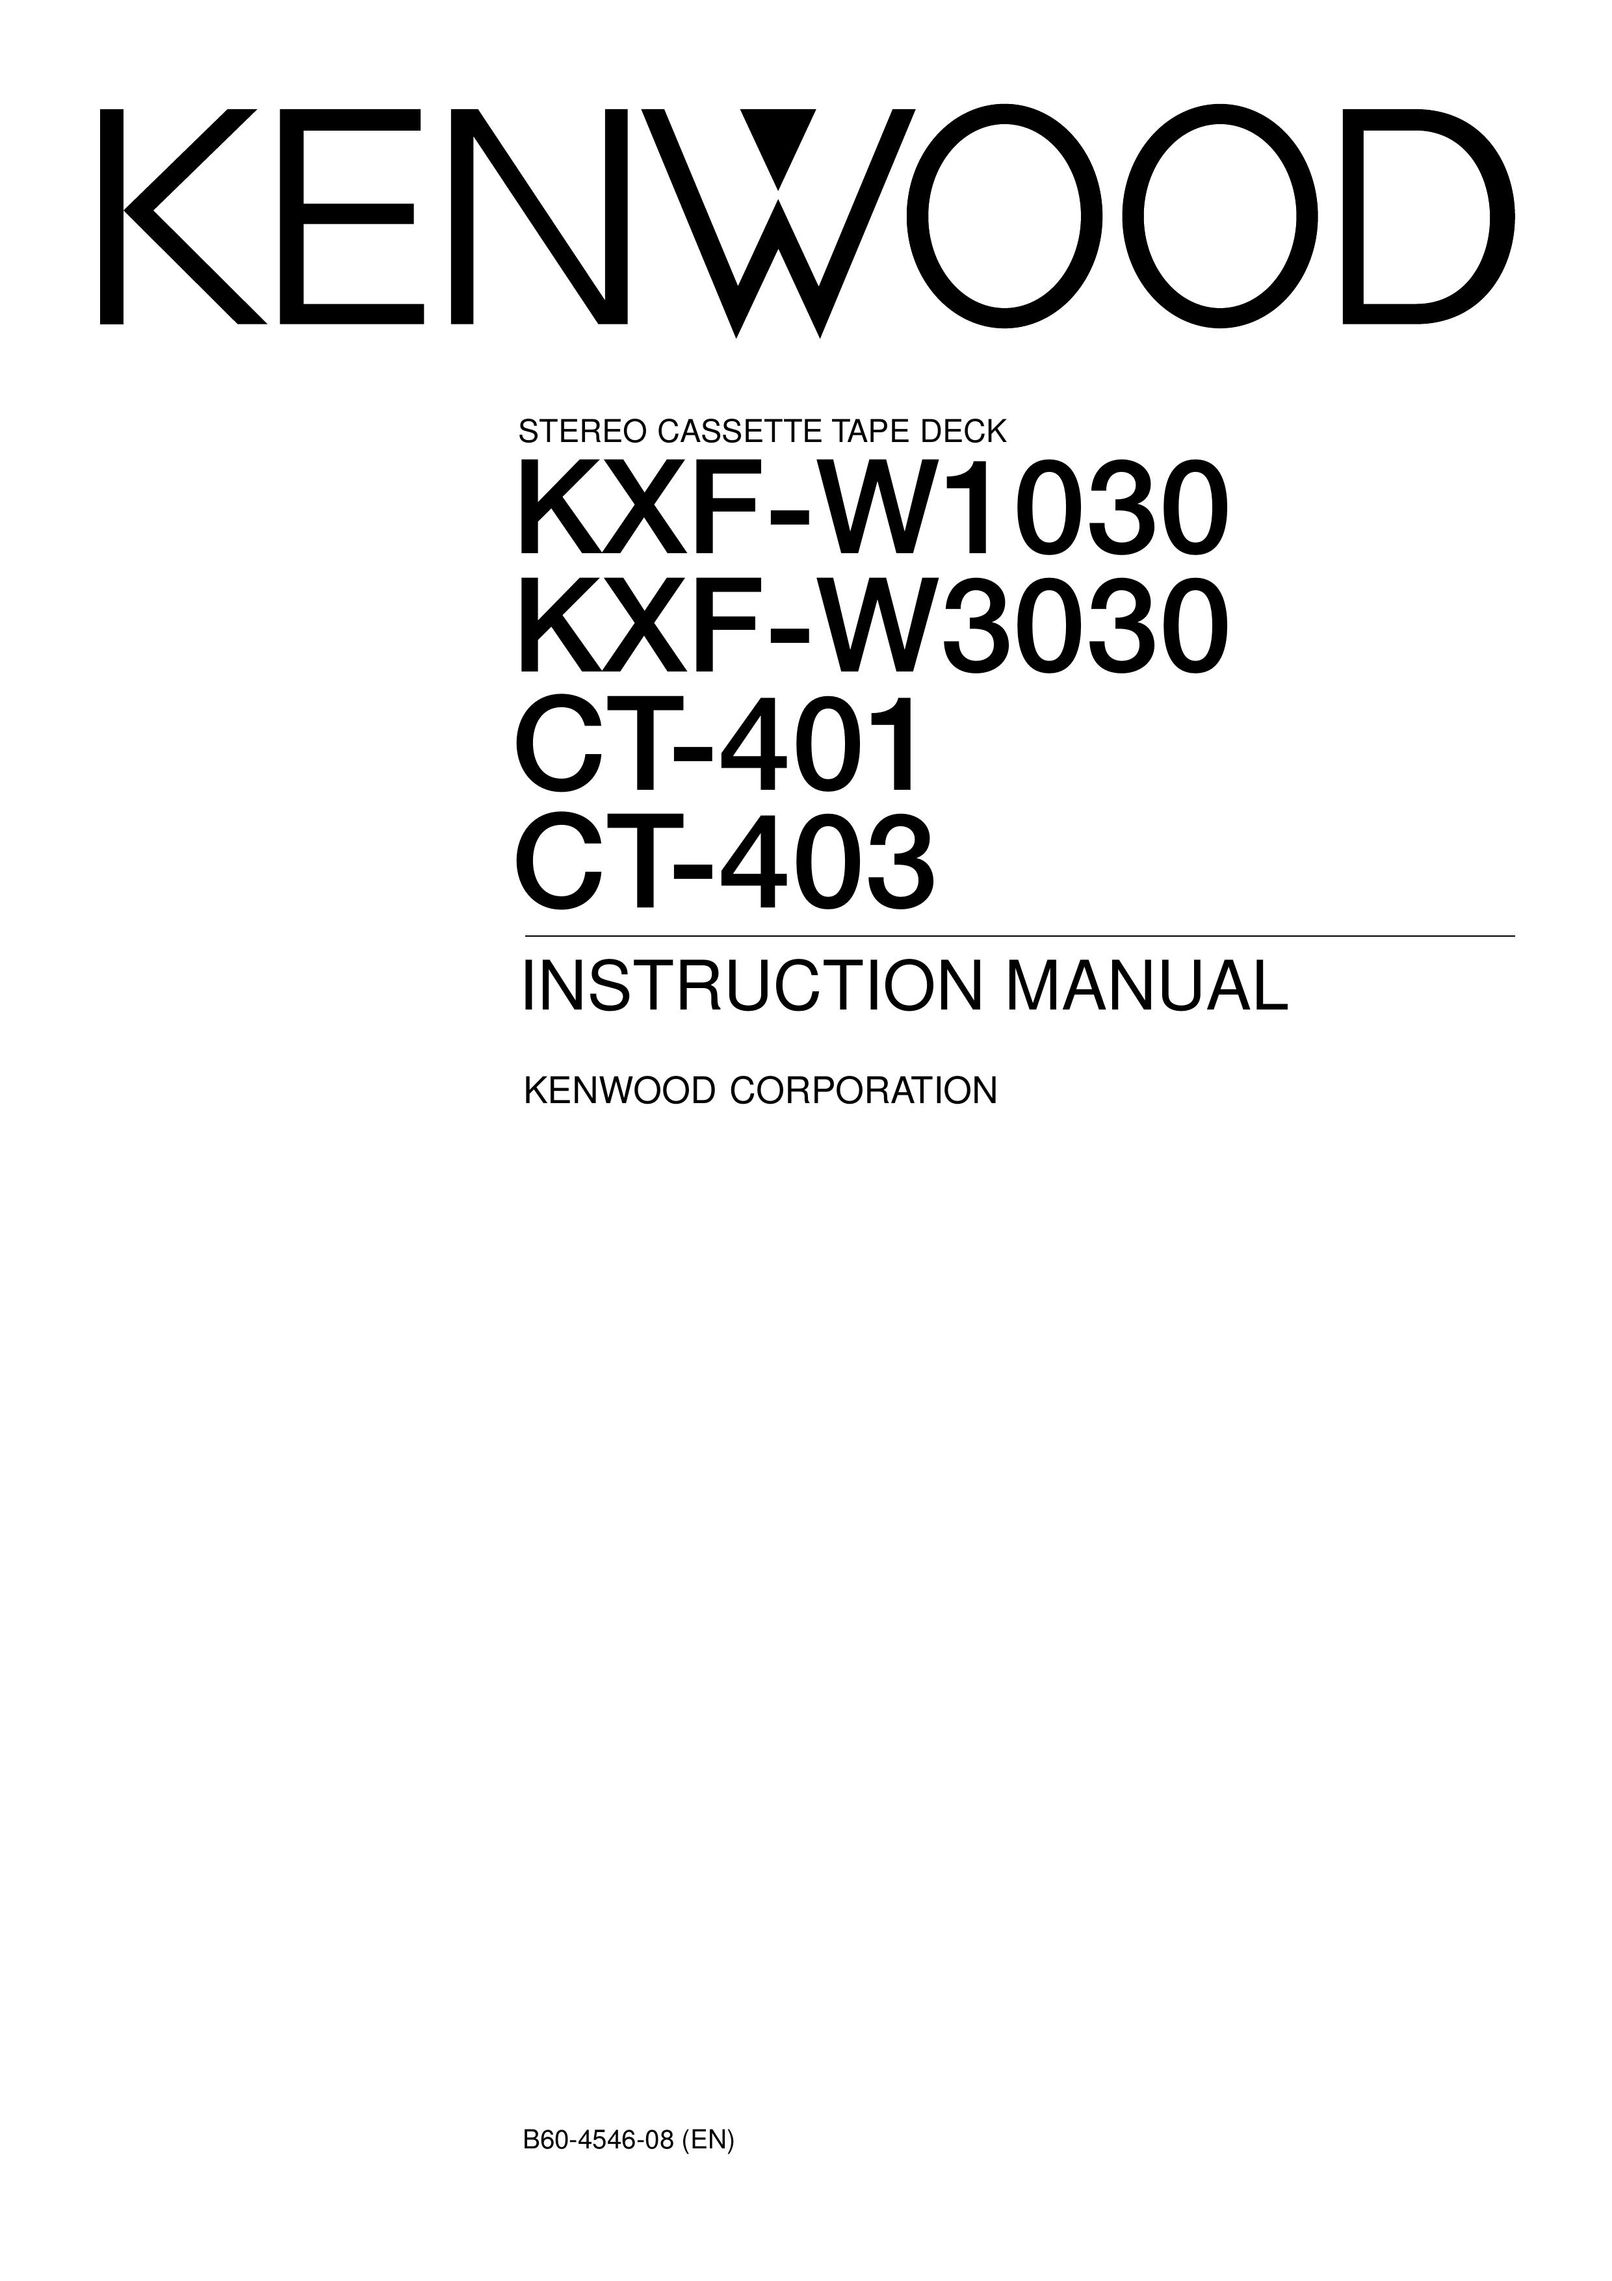 Kenwood CT-401 Stereo System User Manual